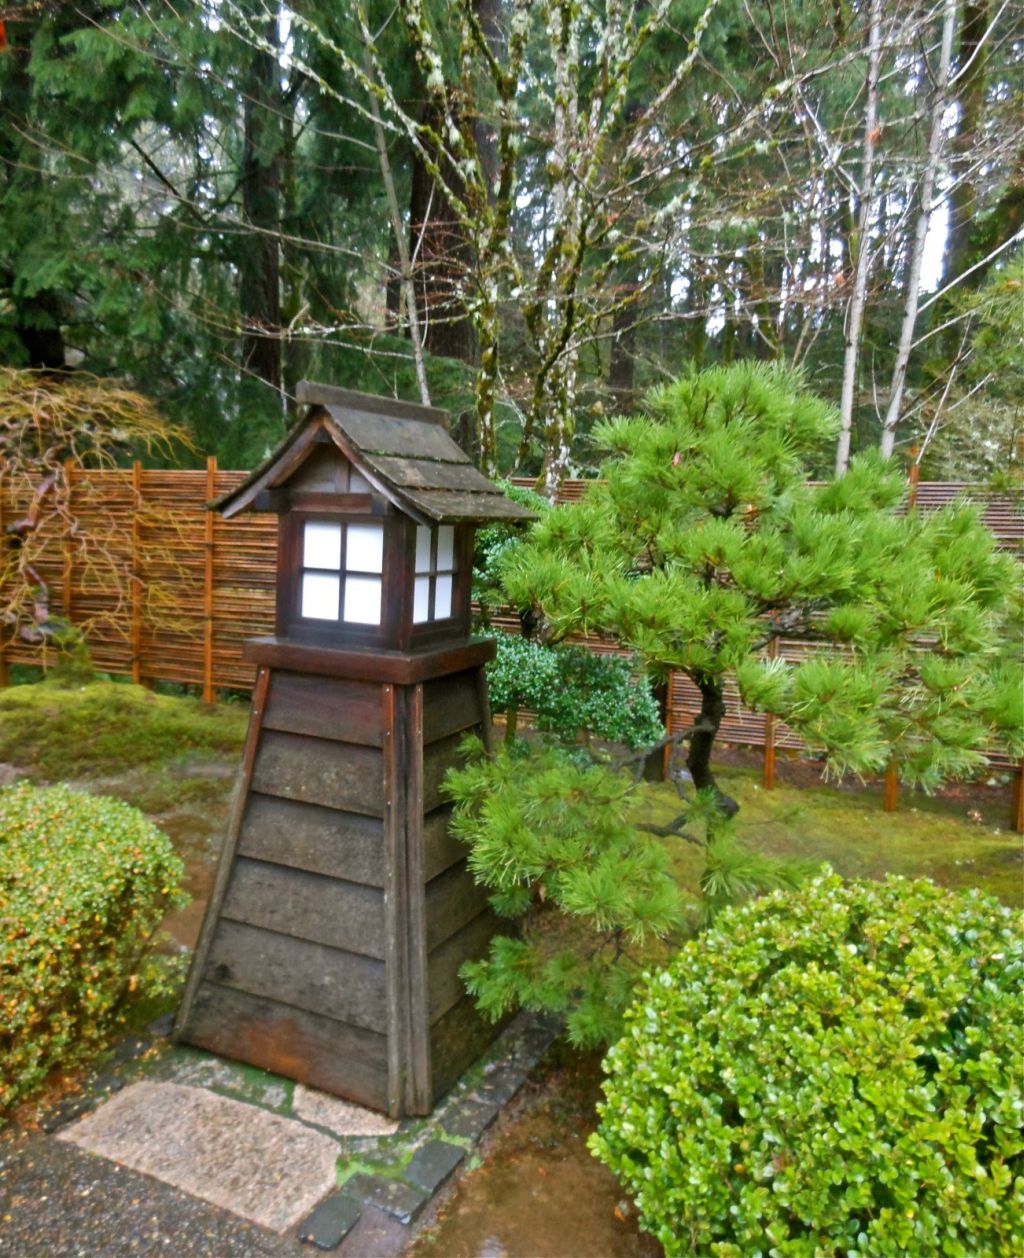 20 Lovely Japanese Garden Designs for Small Spaces